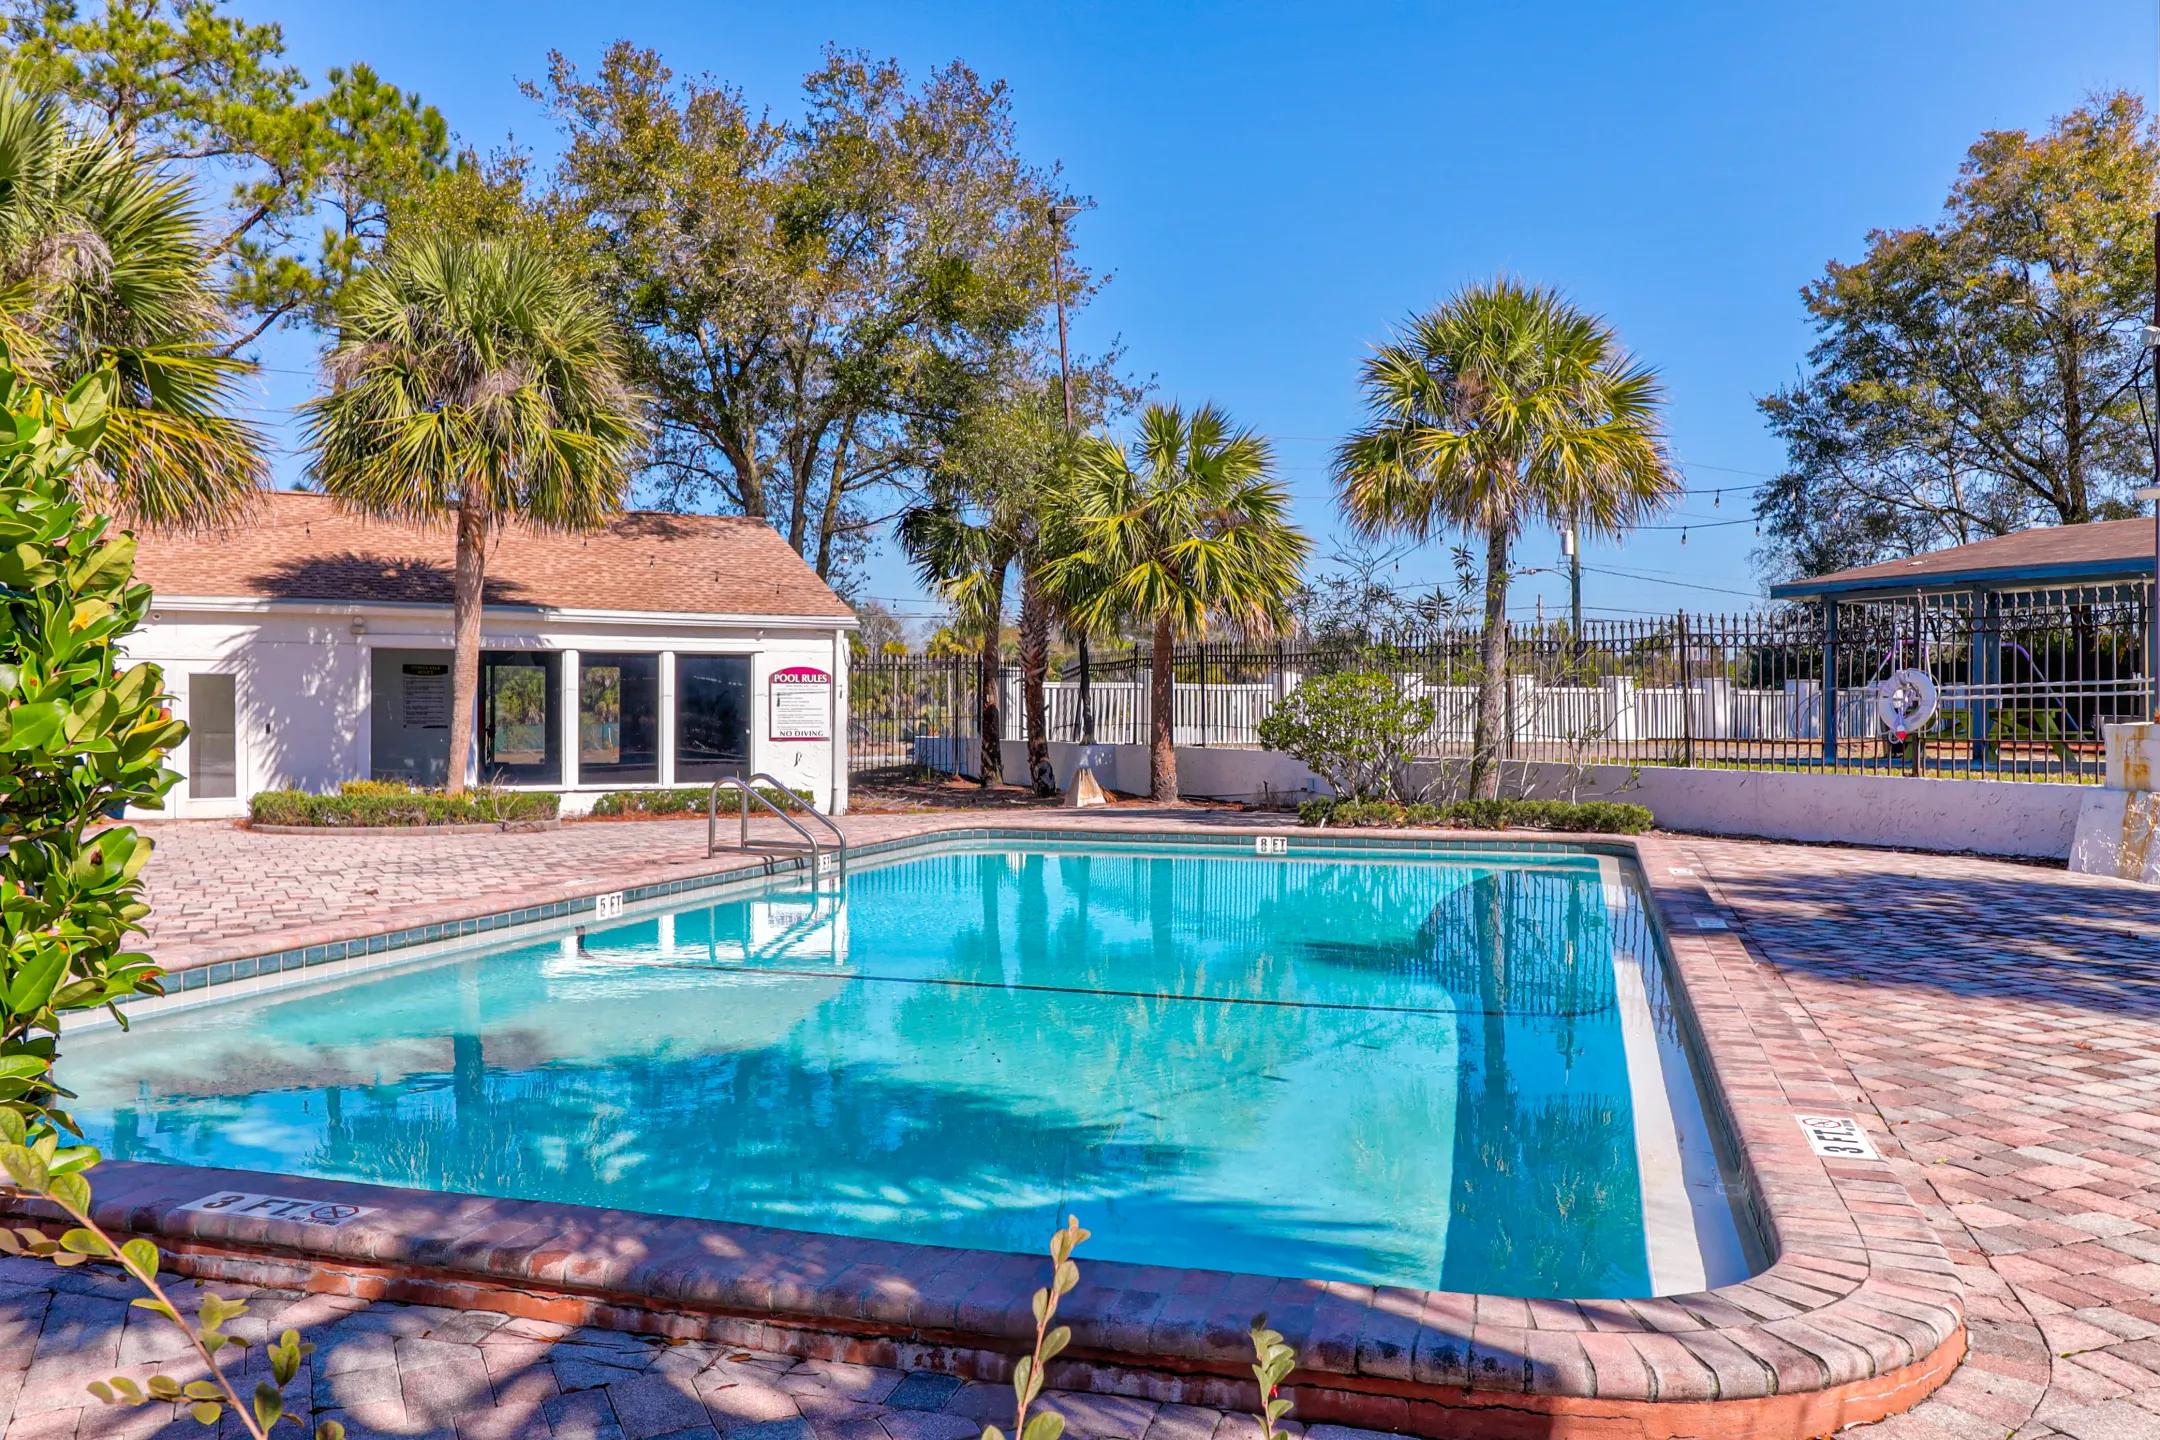 Pool - Red Bay Apartments - Jacksonville, FL